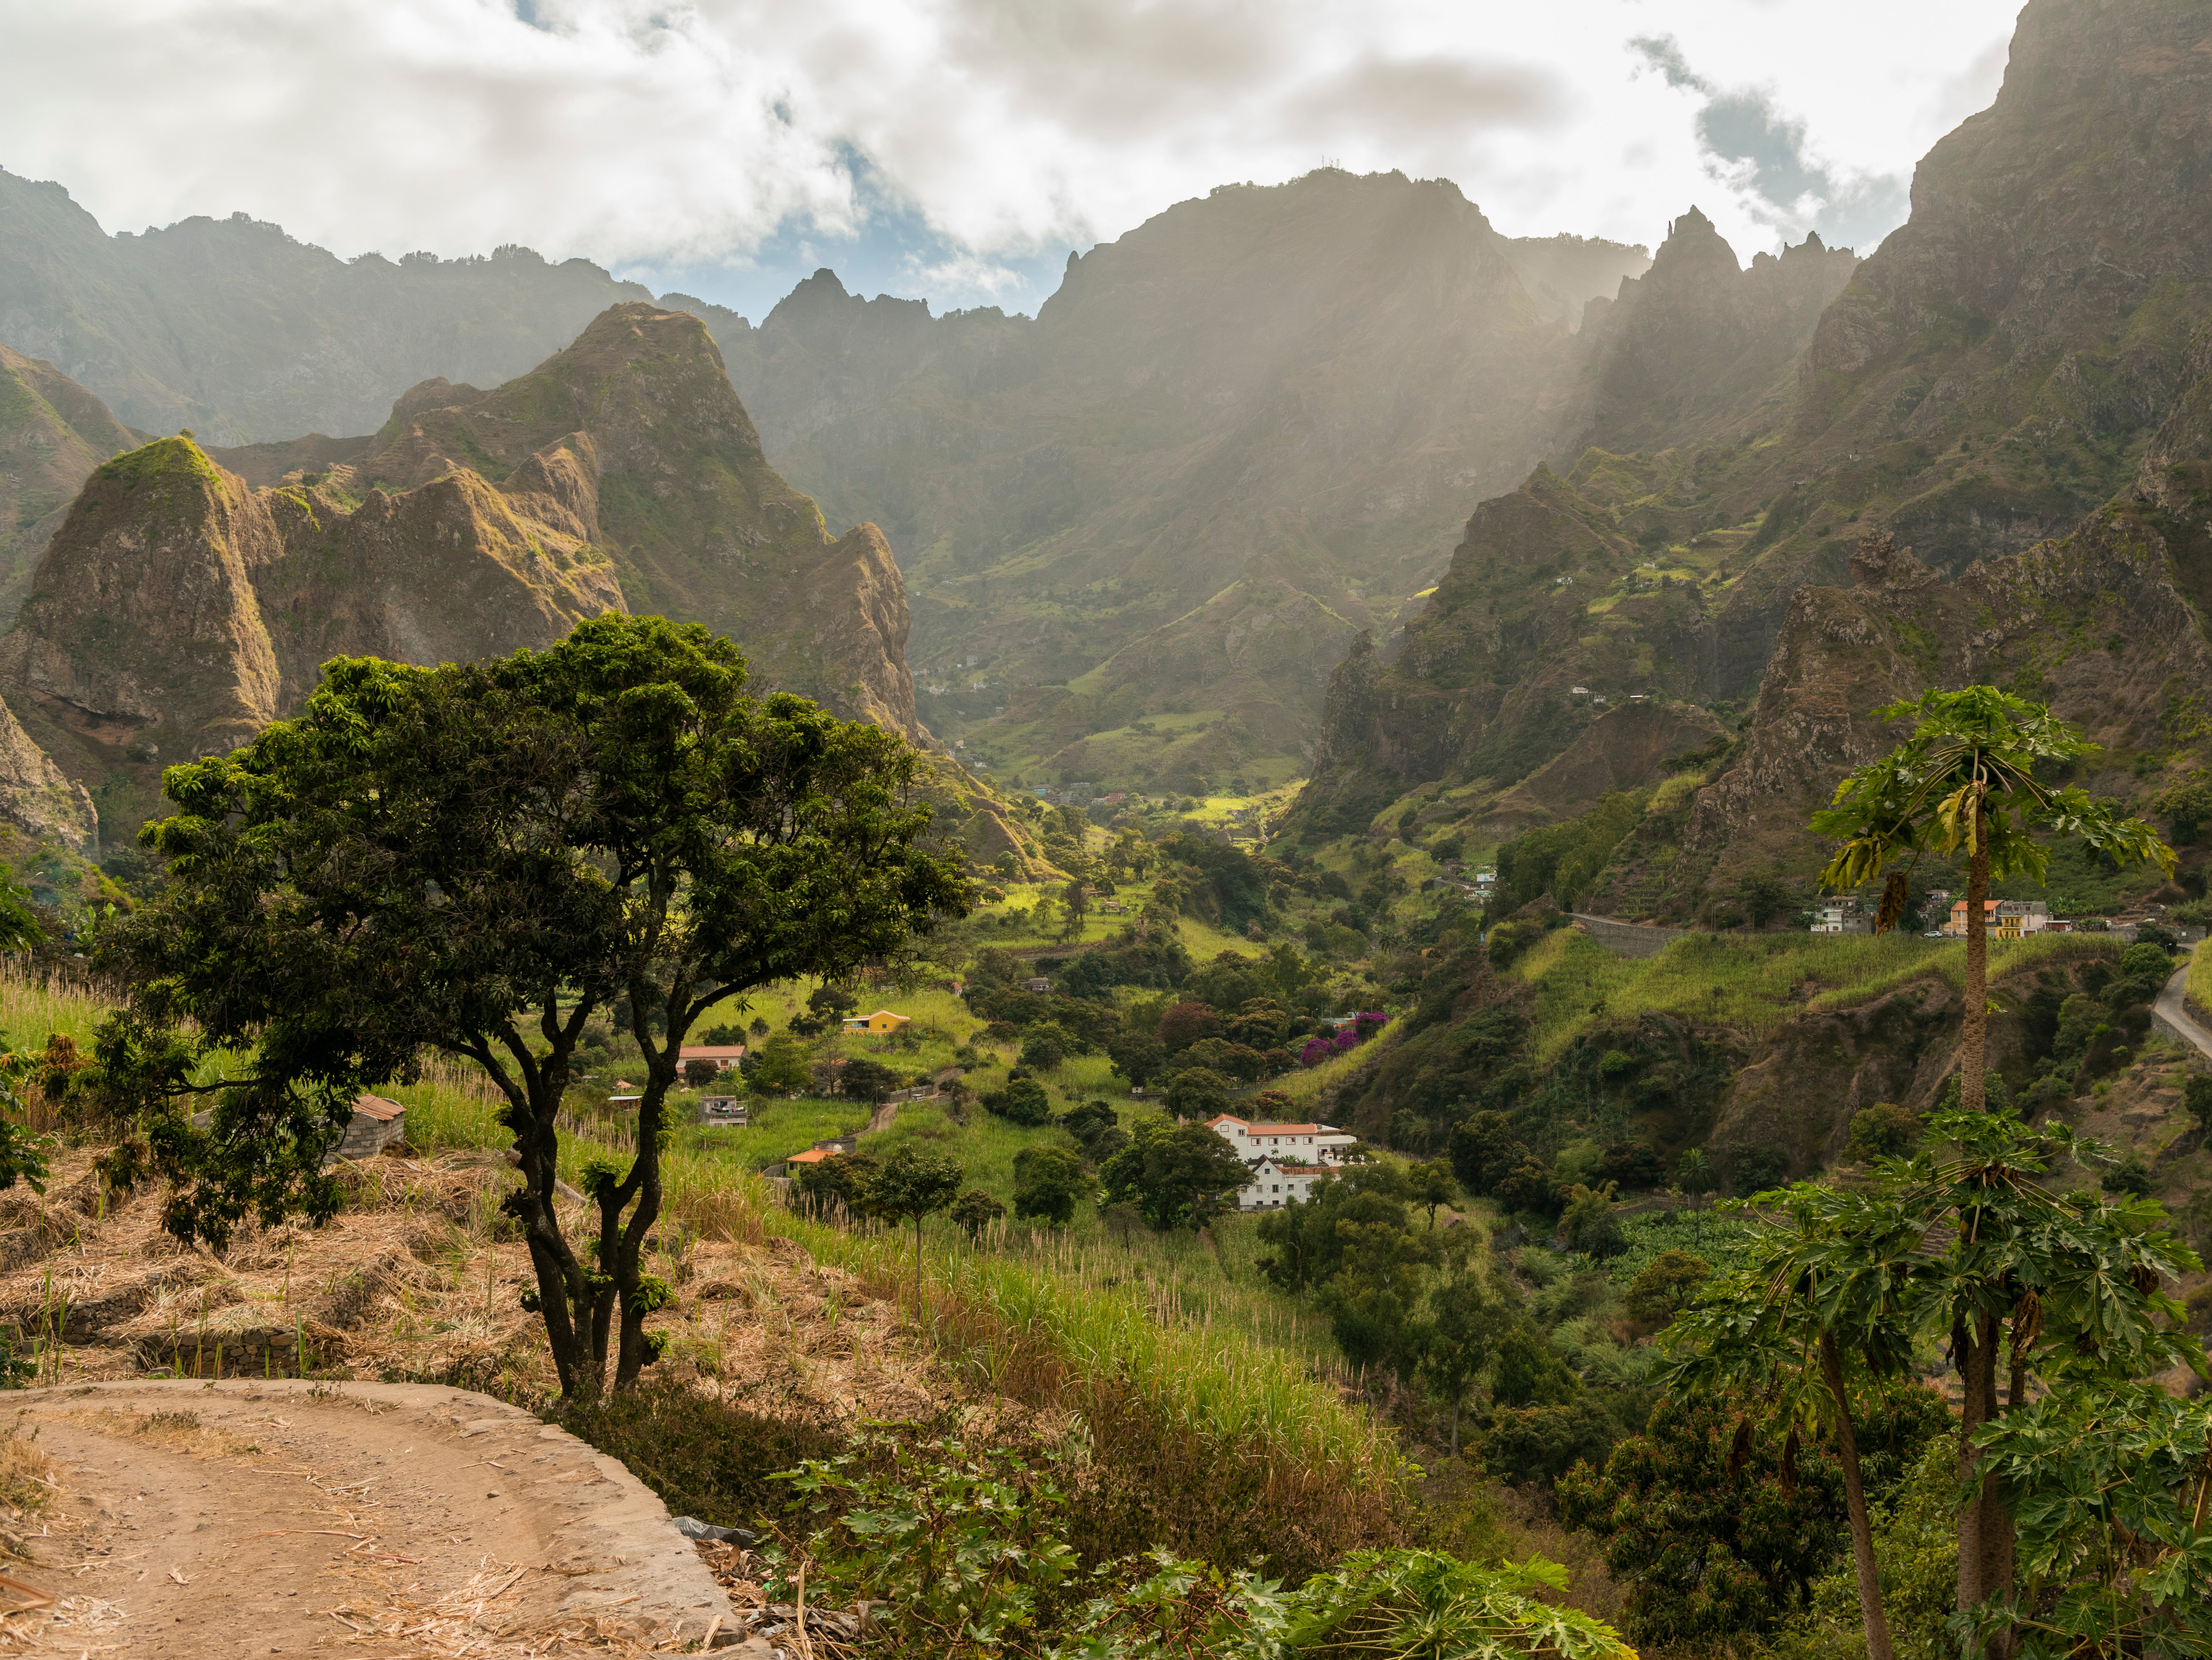 Cape Verde travel guide: Discovering 'morabeza' in the mountains of Santo Antao | The Independent